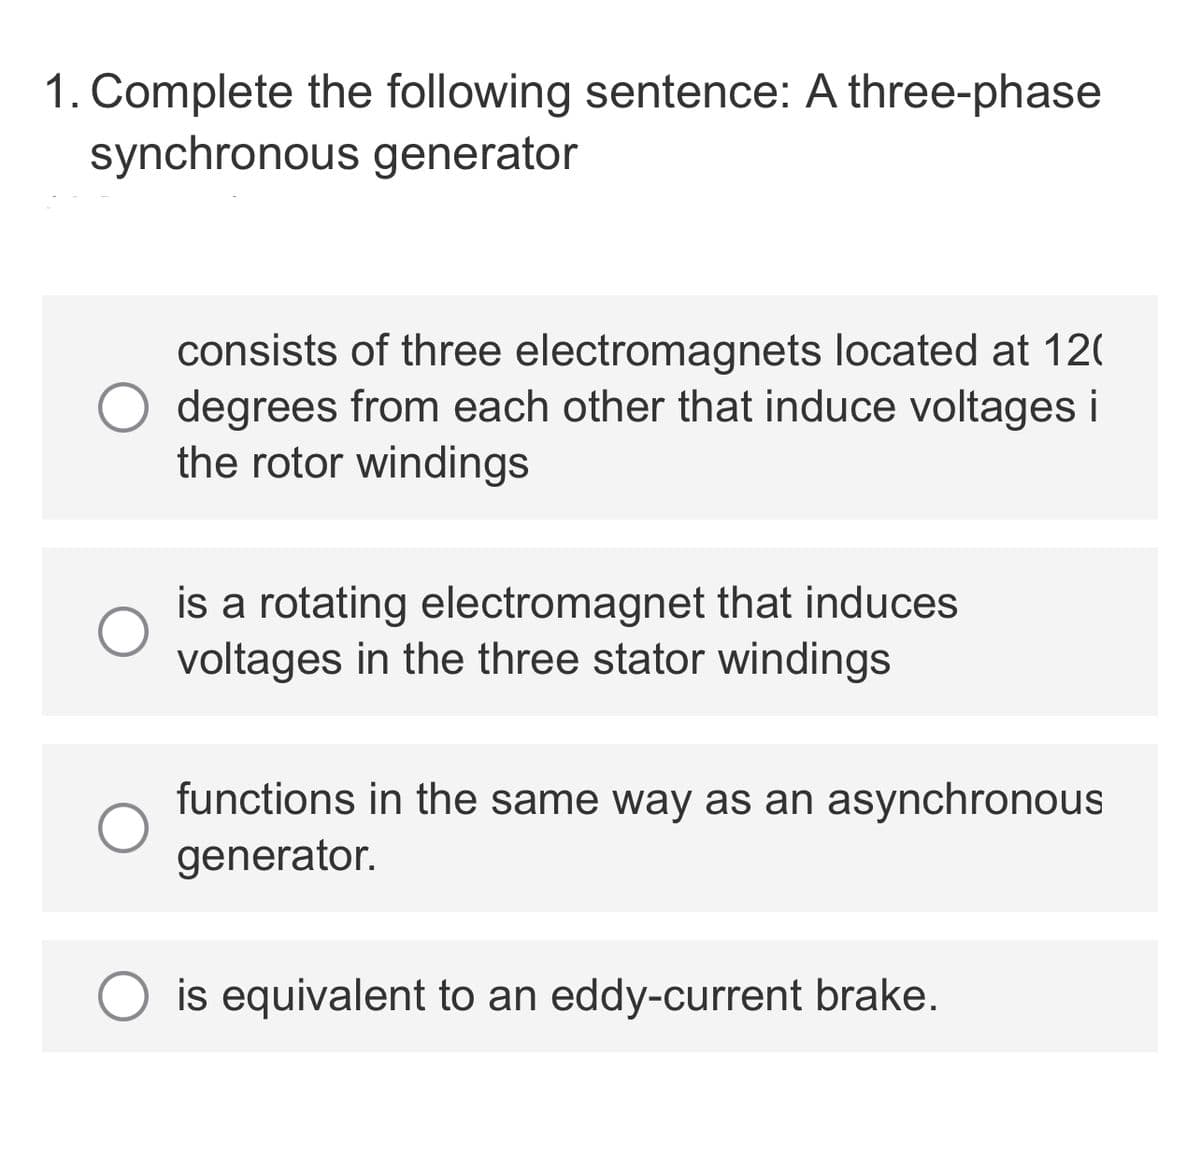 1. Complete the following sentence: A three-phase
synchronous generator
consists of three electromagnets located at 120
degrees from each other that induce voltages i
the rotor windings
is a rotating electromagnet that induces
voltages in the three stator windings
functions in the same way as an asynchronous
generator.
is equivalent to an eddy-current brake.
